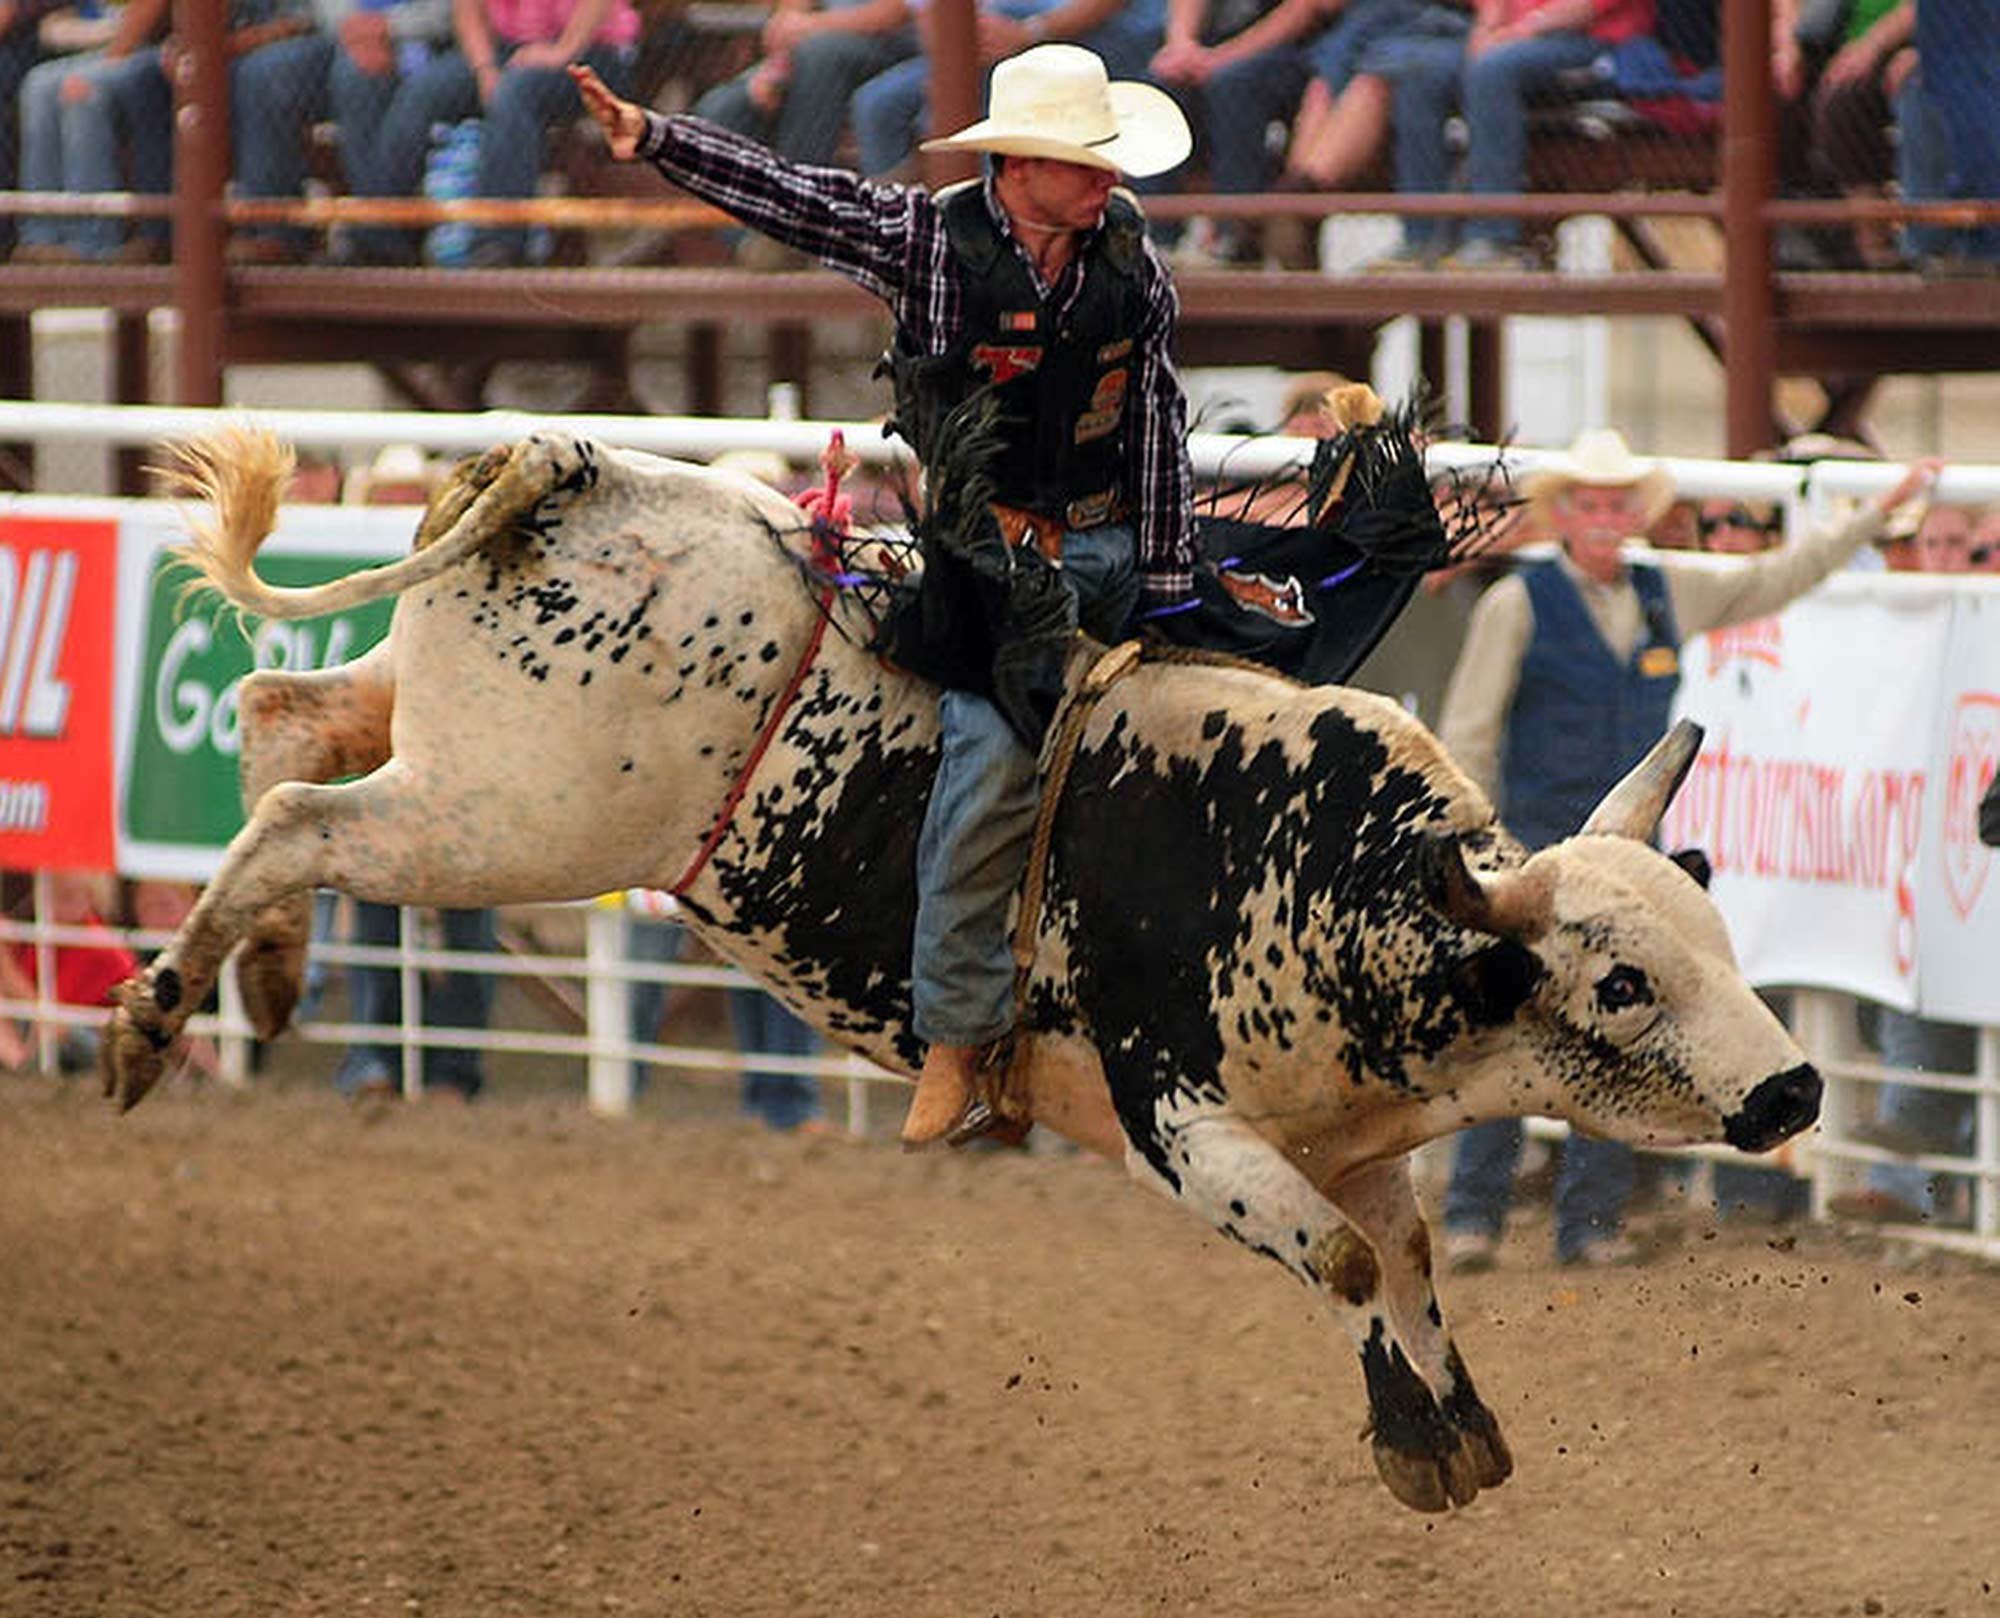 Bullrider Rodeo Western Cowboy Extreme Cow Wallpaper Background